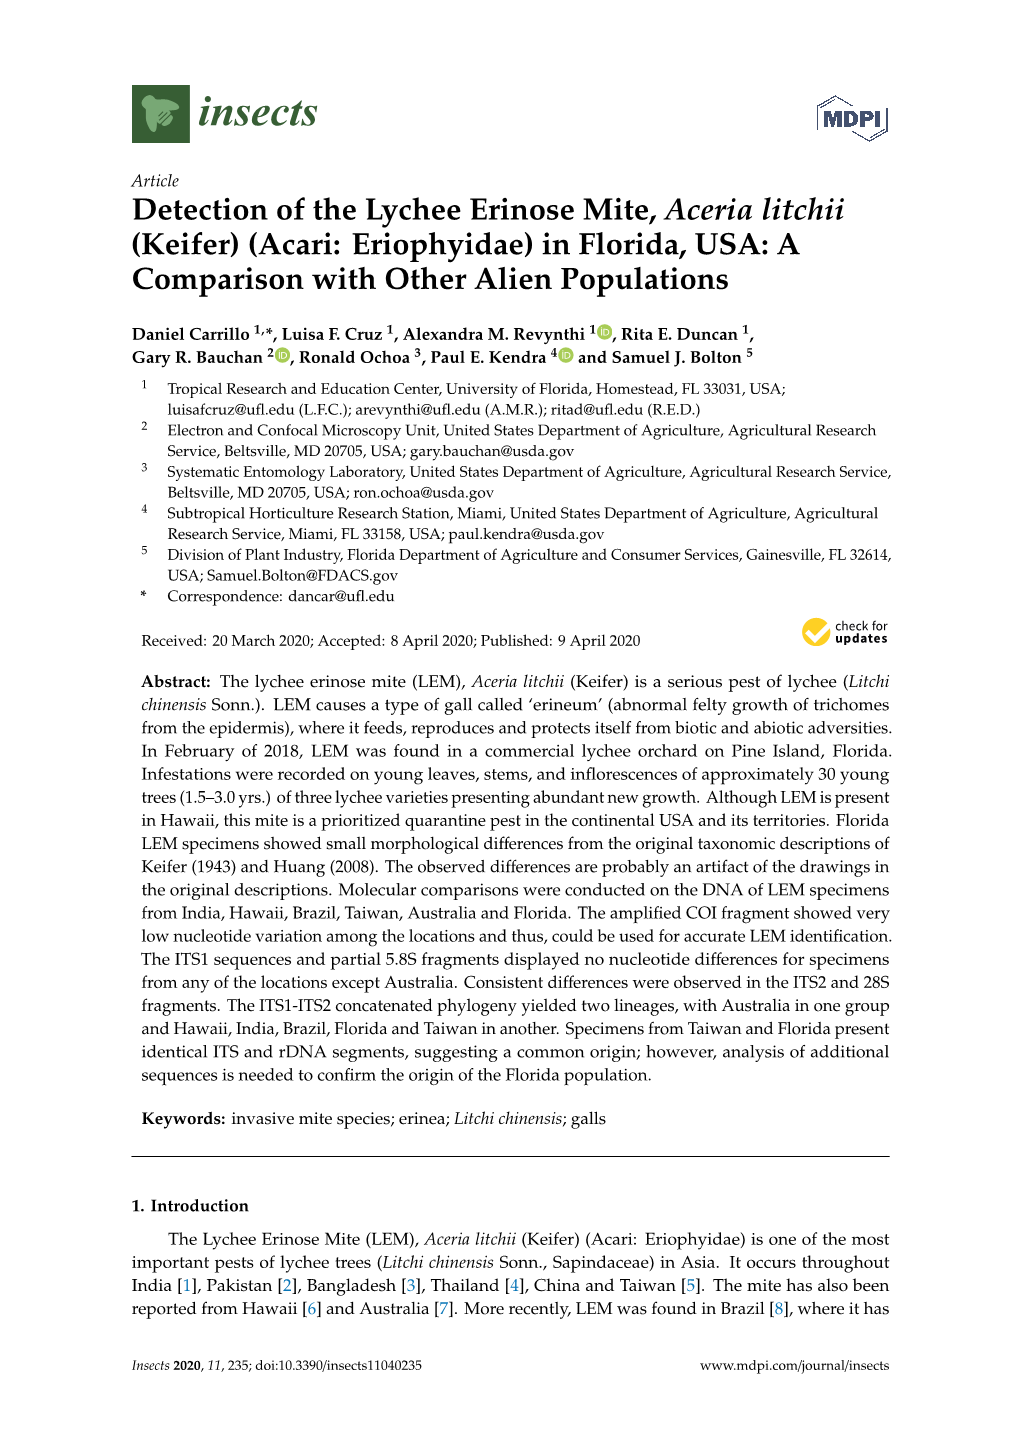 Detection of the Lychee Erinose Mite, Aceria Litchii (Keifer) (Acari: Eriophyidae) in Florida, USA: a Comparison with Other Alien Populations